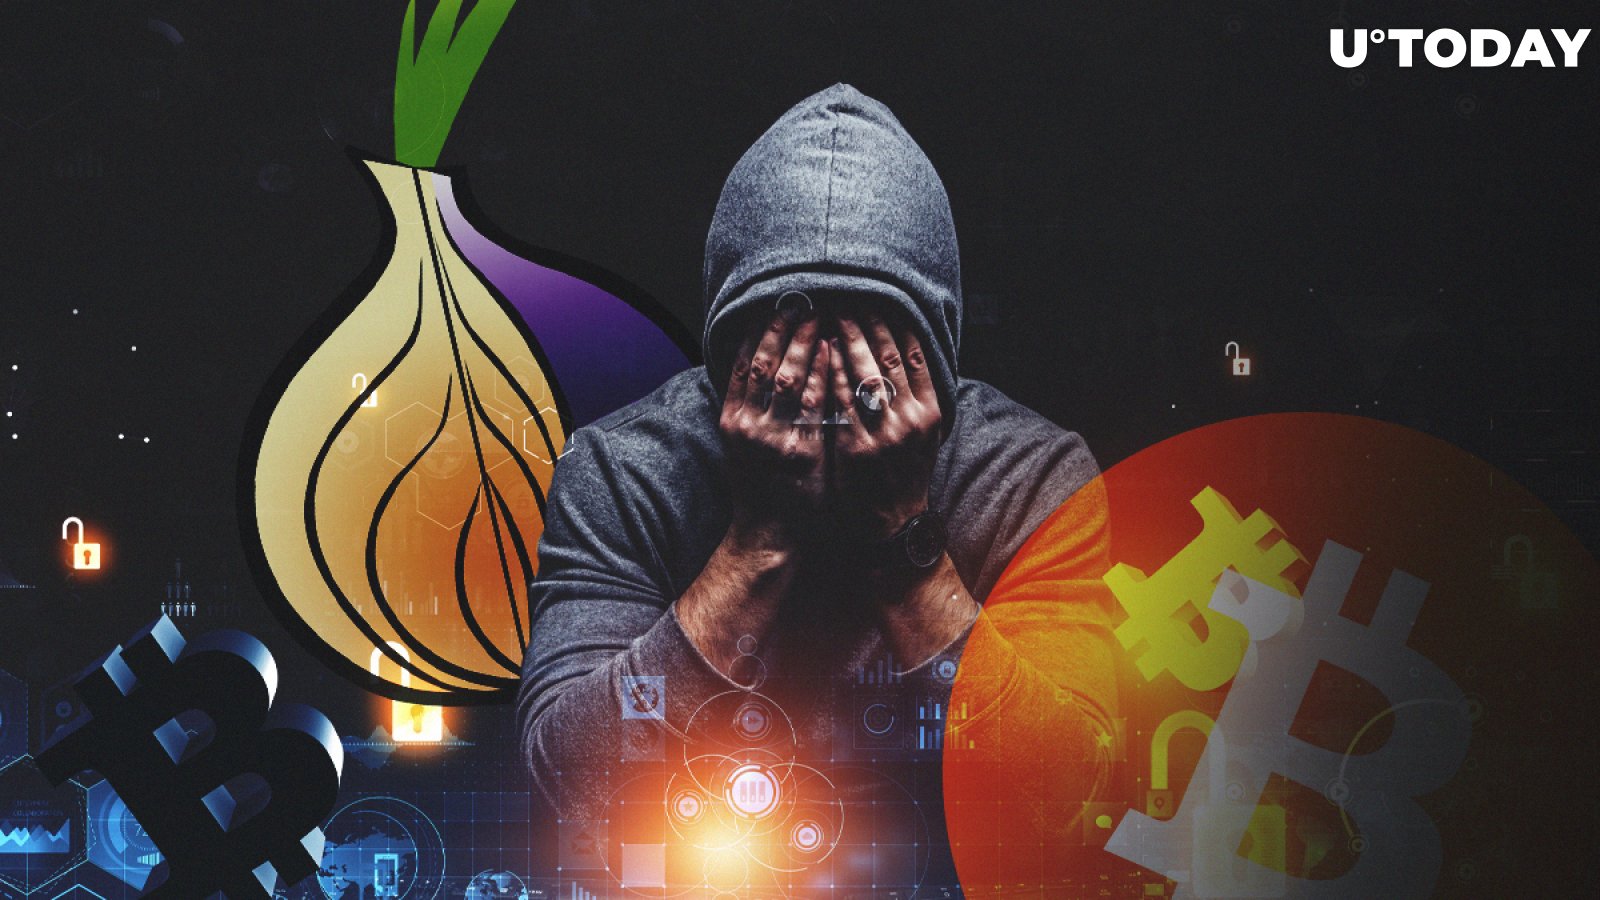 Darknet tor market bitcoins between rock and hard place quotes